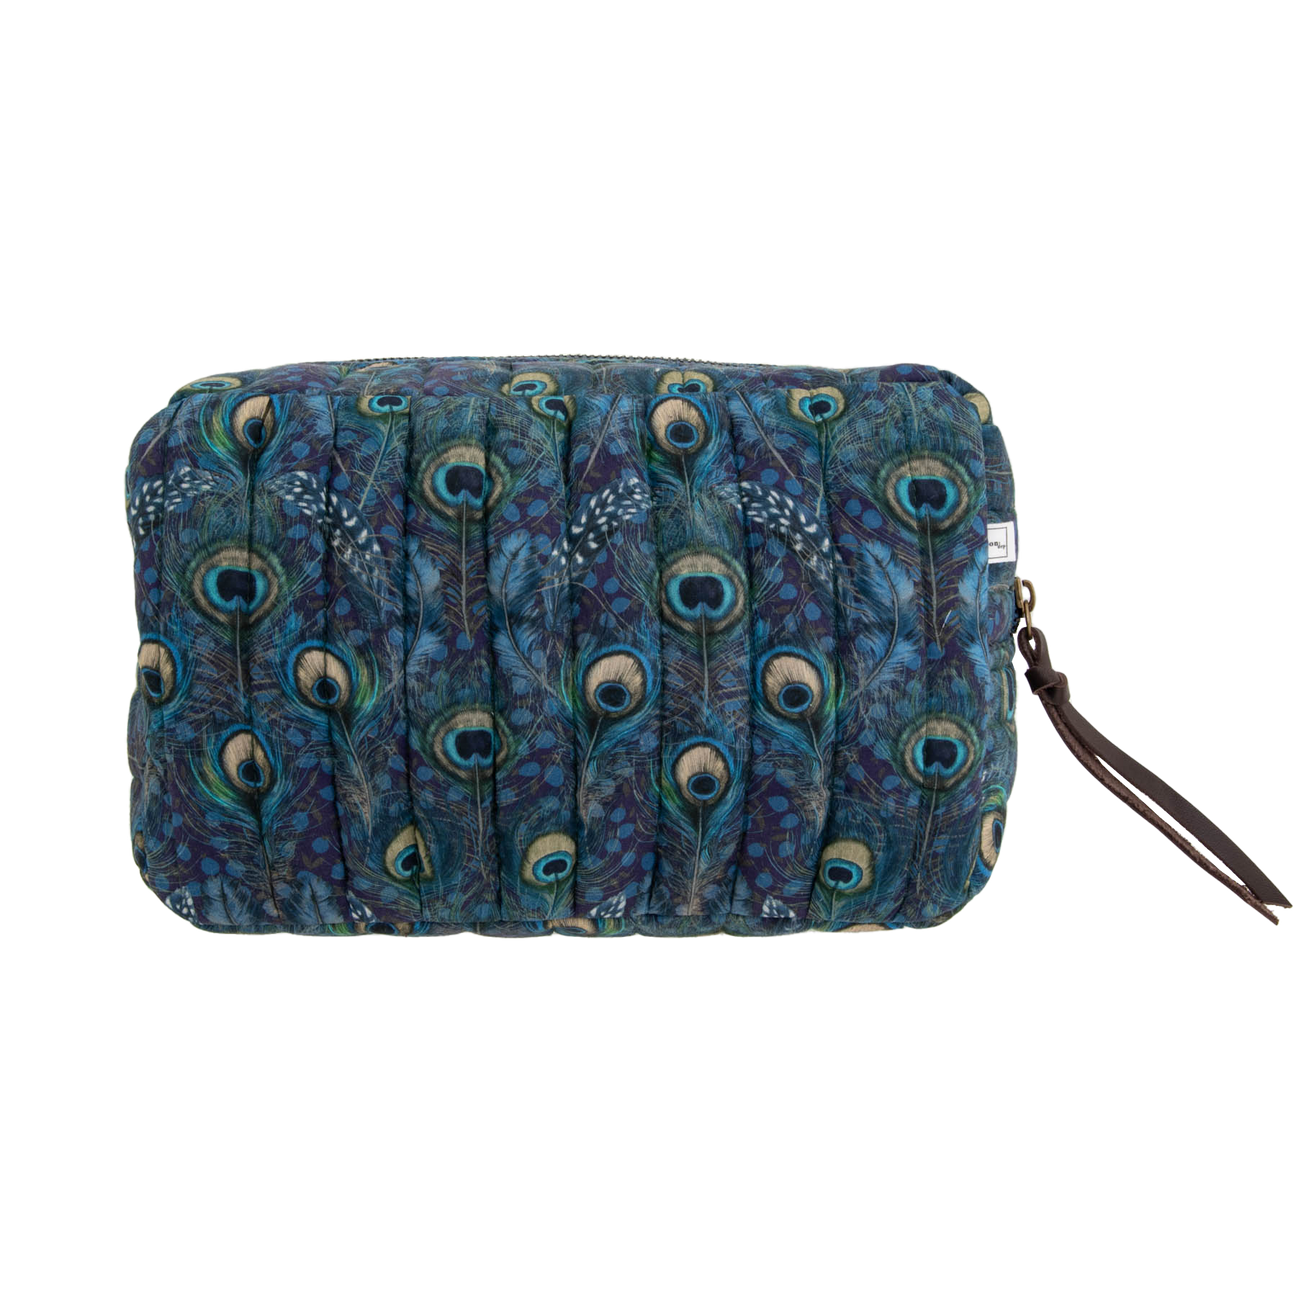 Pouch square / Liberty Peacock